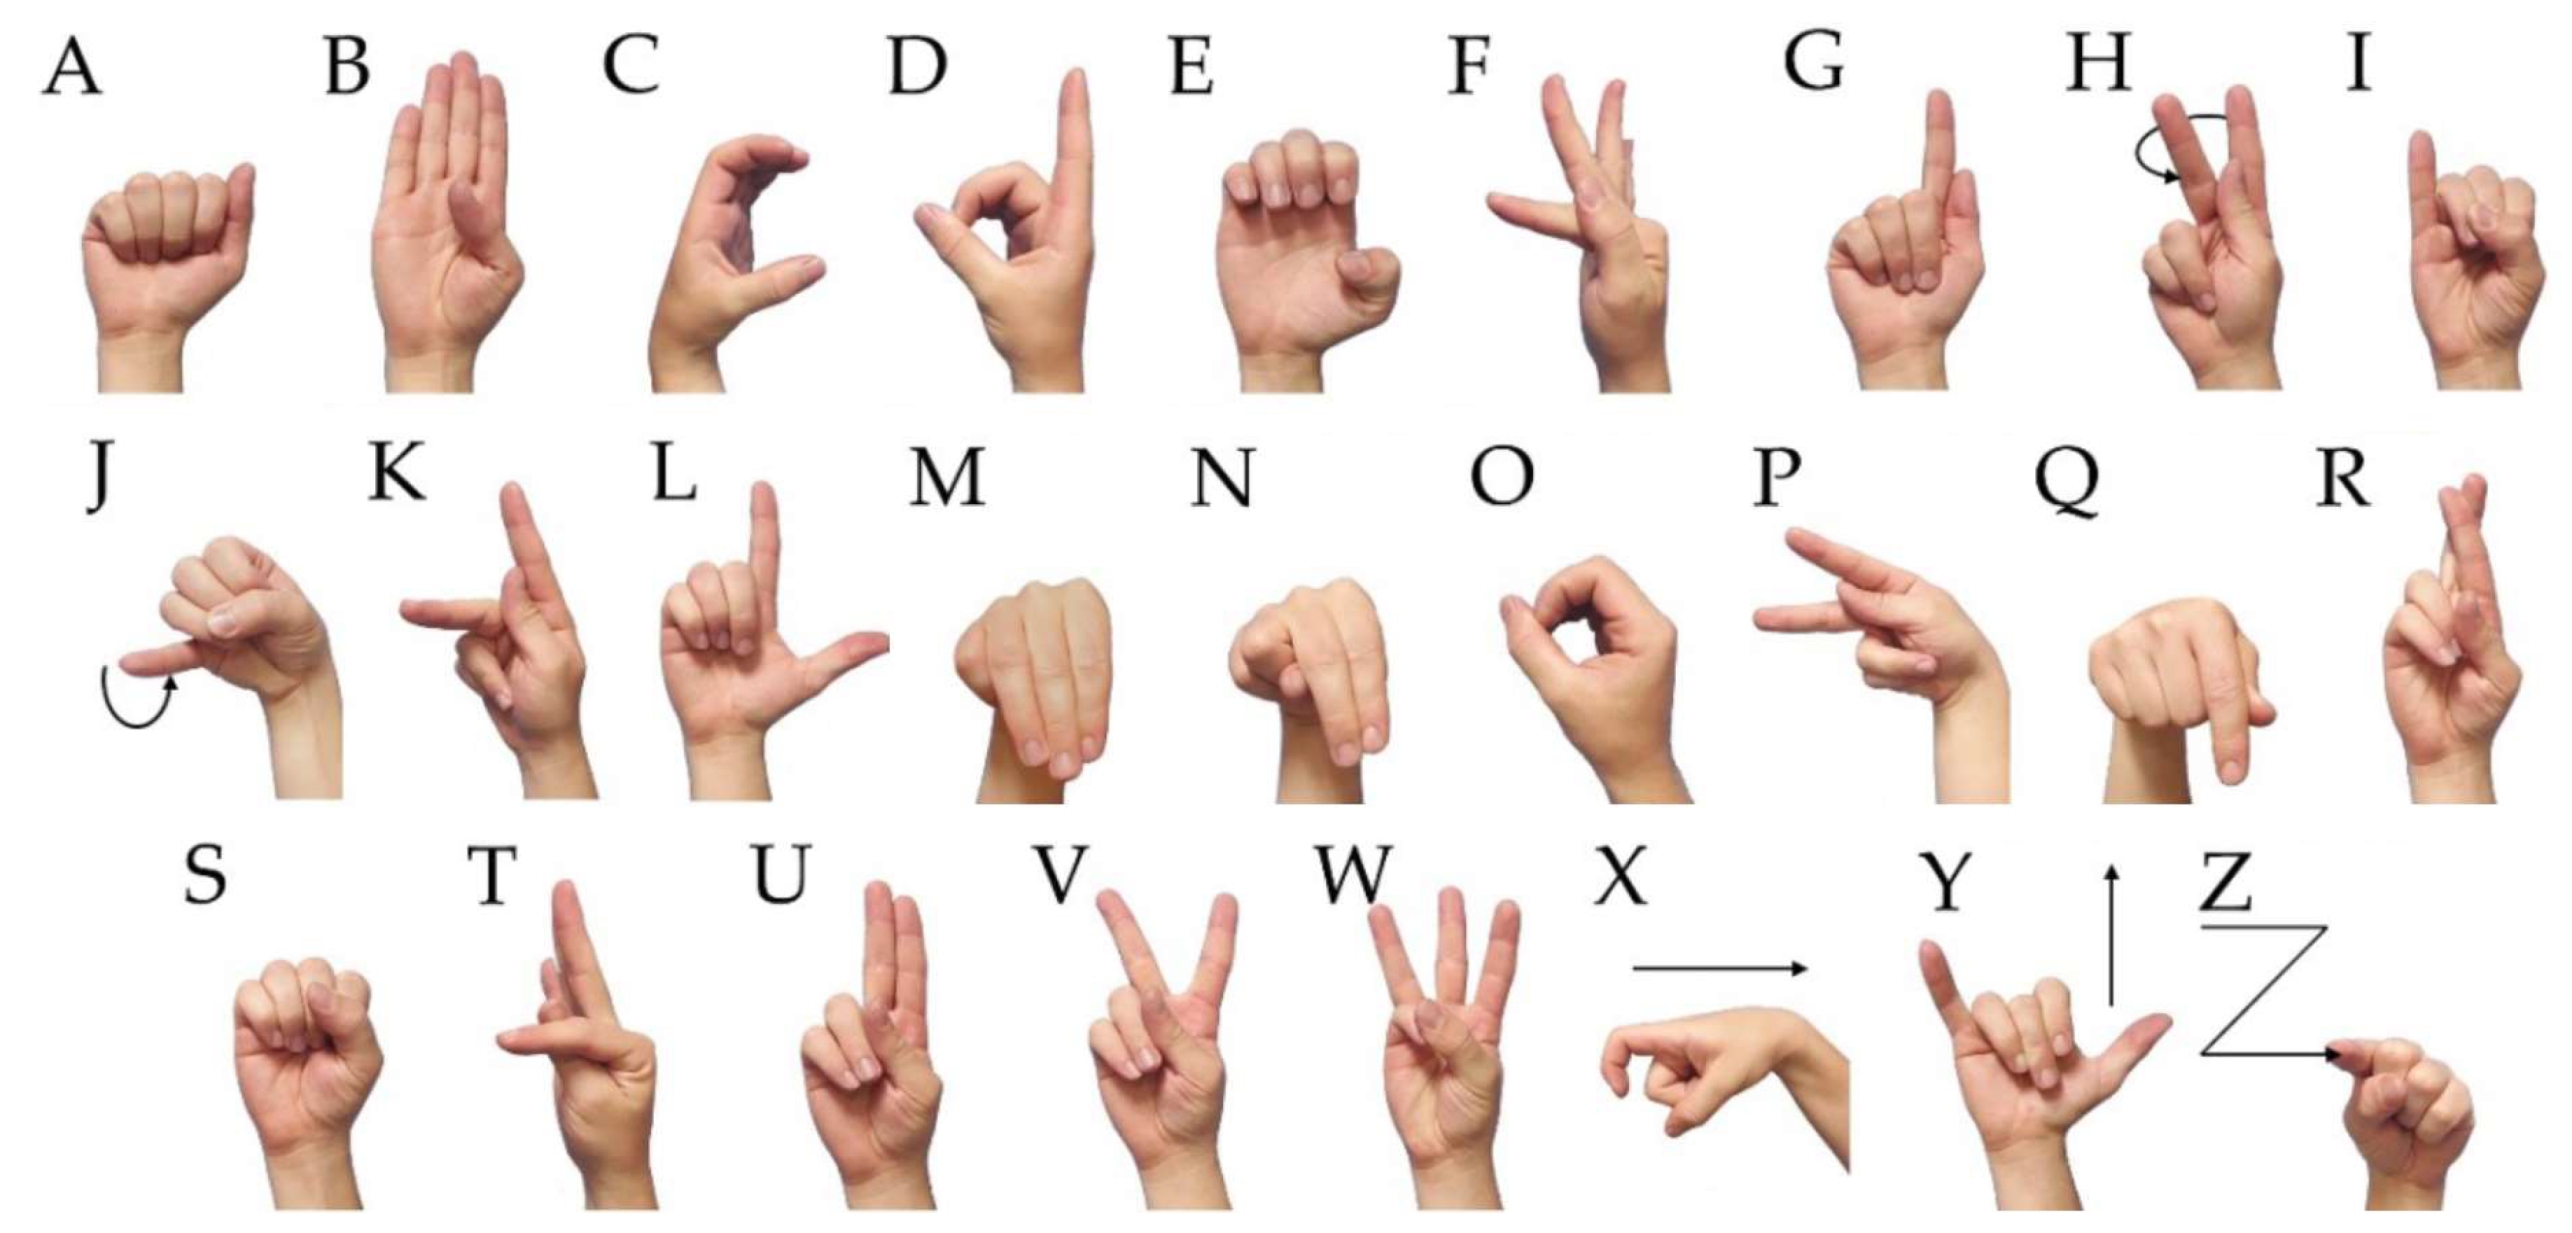 Sensors Free Full Text Analysis Of Influence Of Segmentation Features And Classification In Semg Processing A Case Study Of Recognition Of Brazilian Sign Language Alphabet